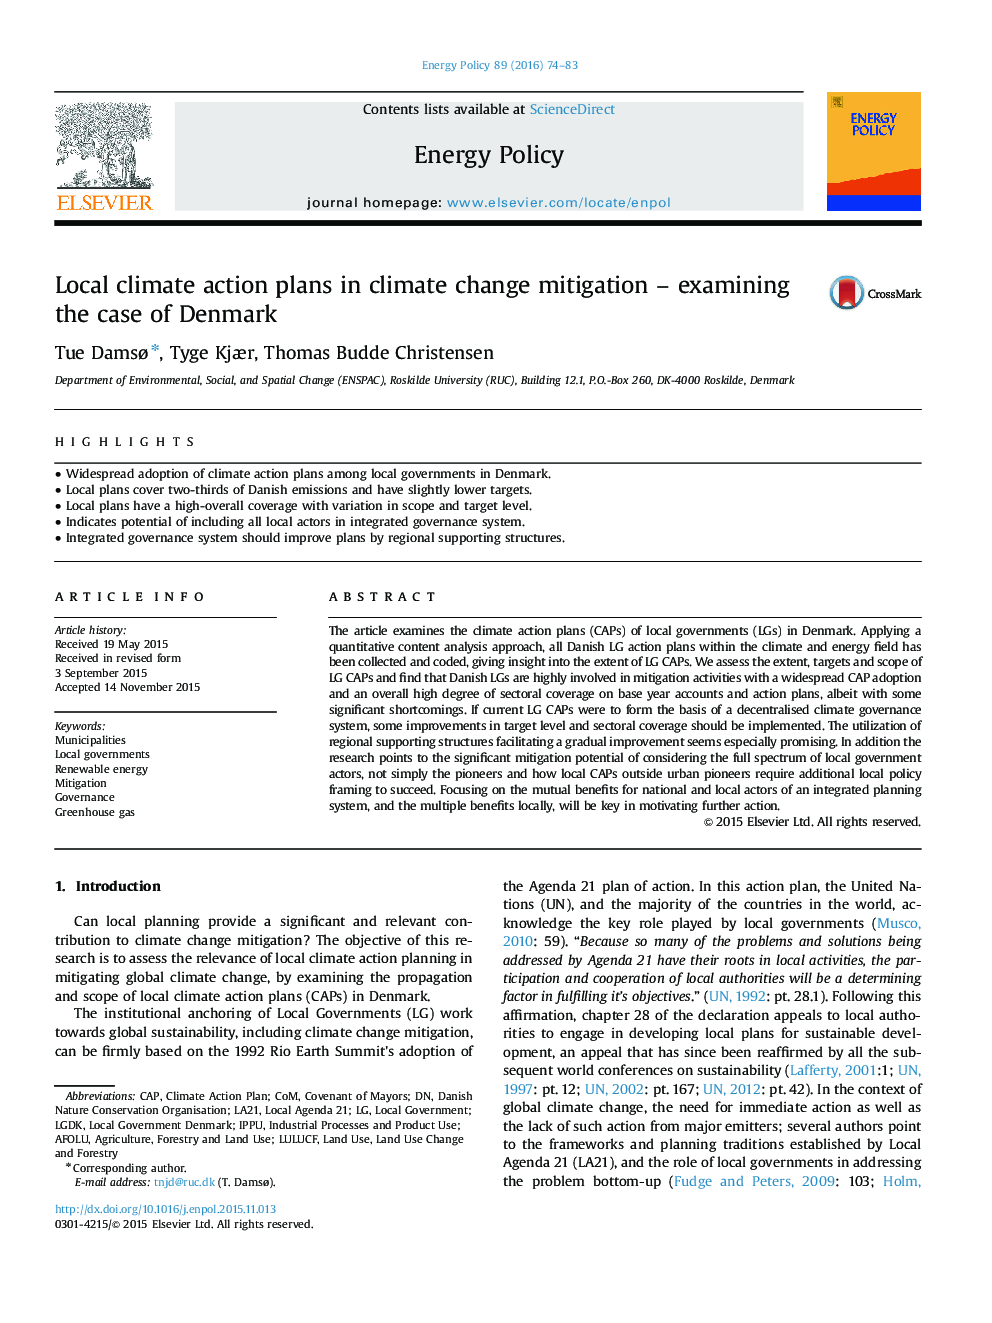 Local climate action plans in climate change mitigation - examining the case of Denmark